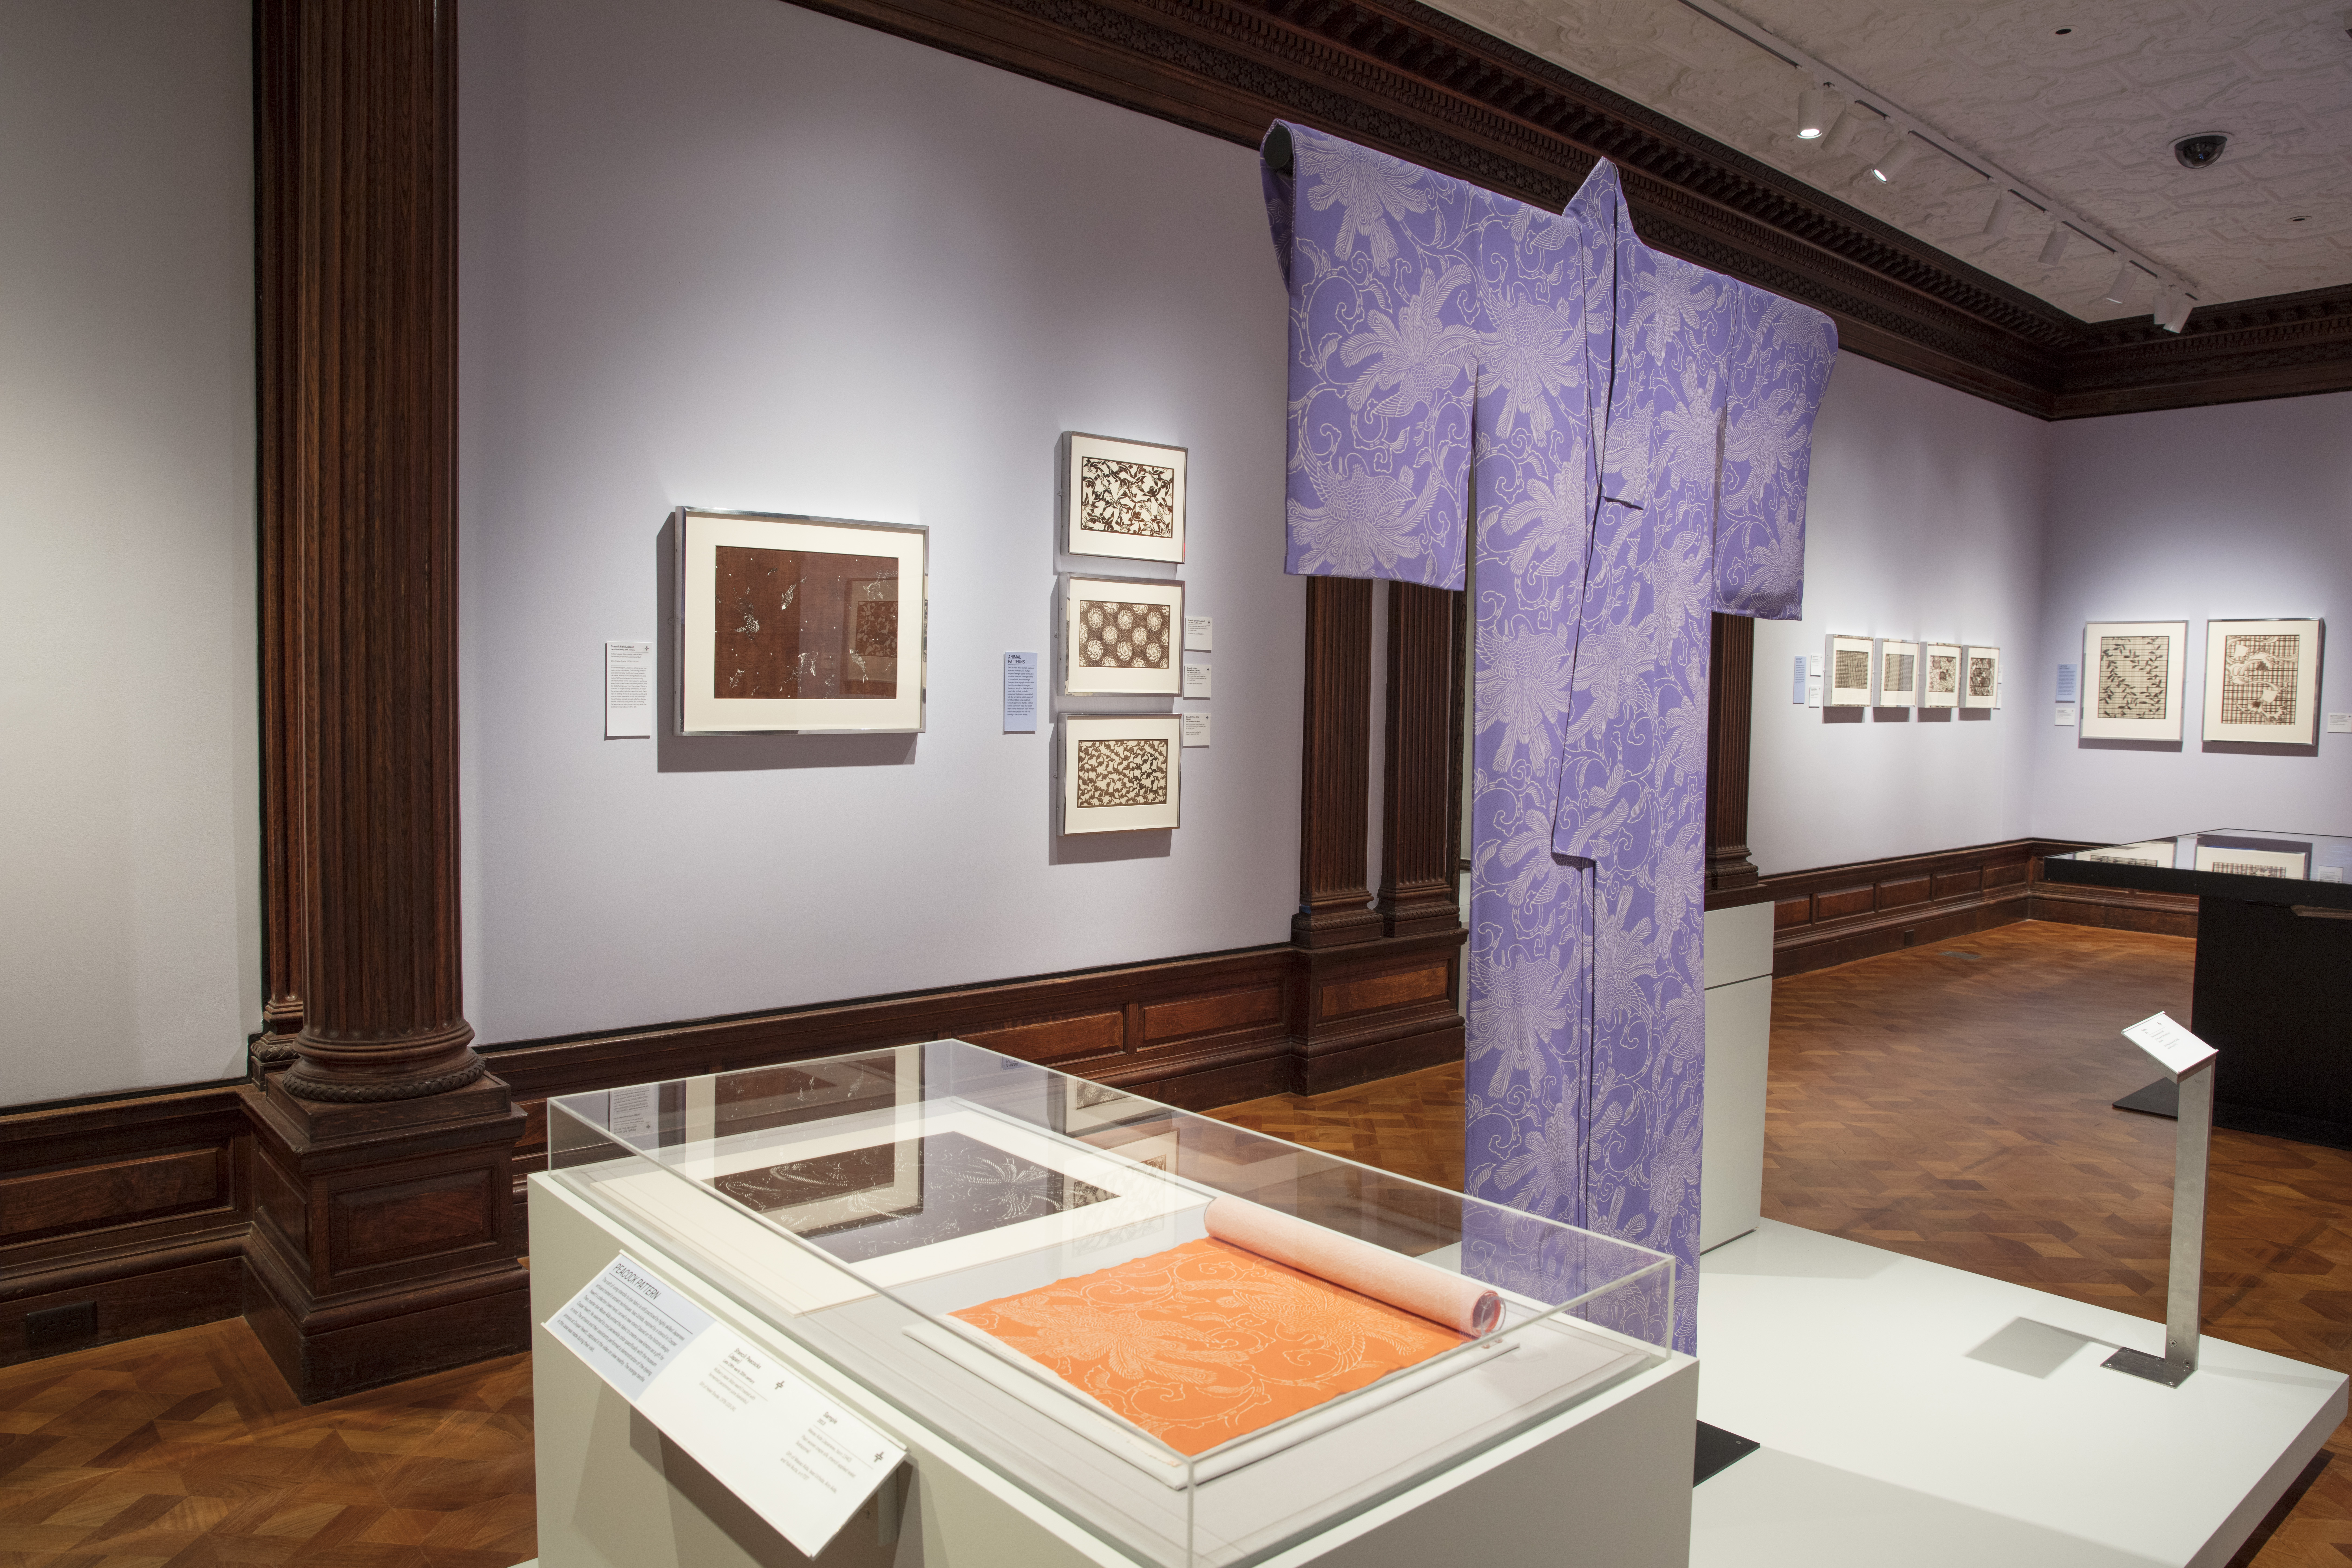 In the galleries of Cooper Hewitt, a blue kimono with a white design of what looks like flowers made of feathers is presented, hanging in a "T" form. In a case nearby, a orange version of the feather-flower design is displayed.